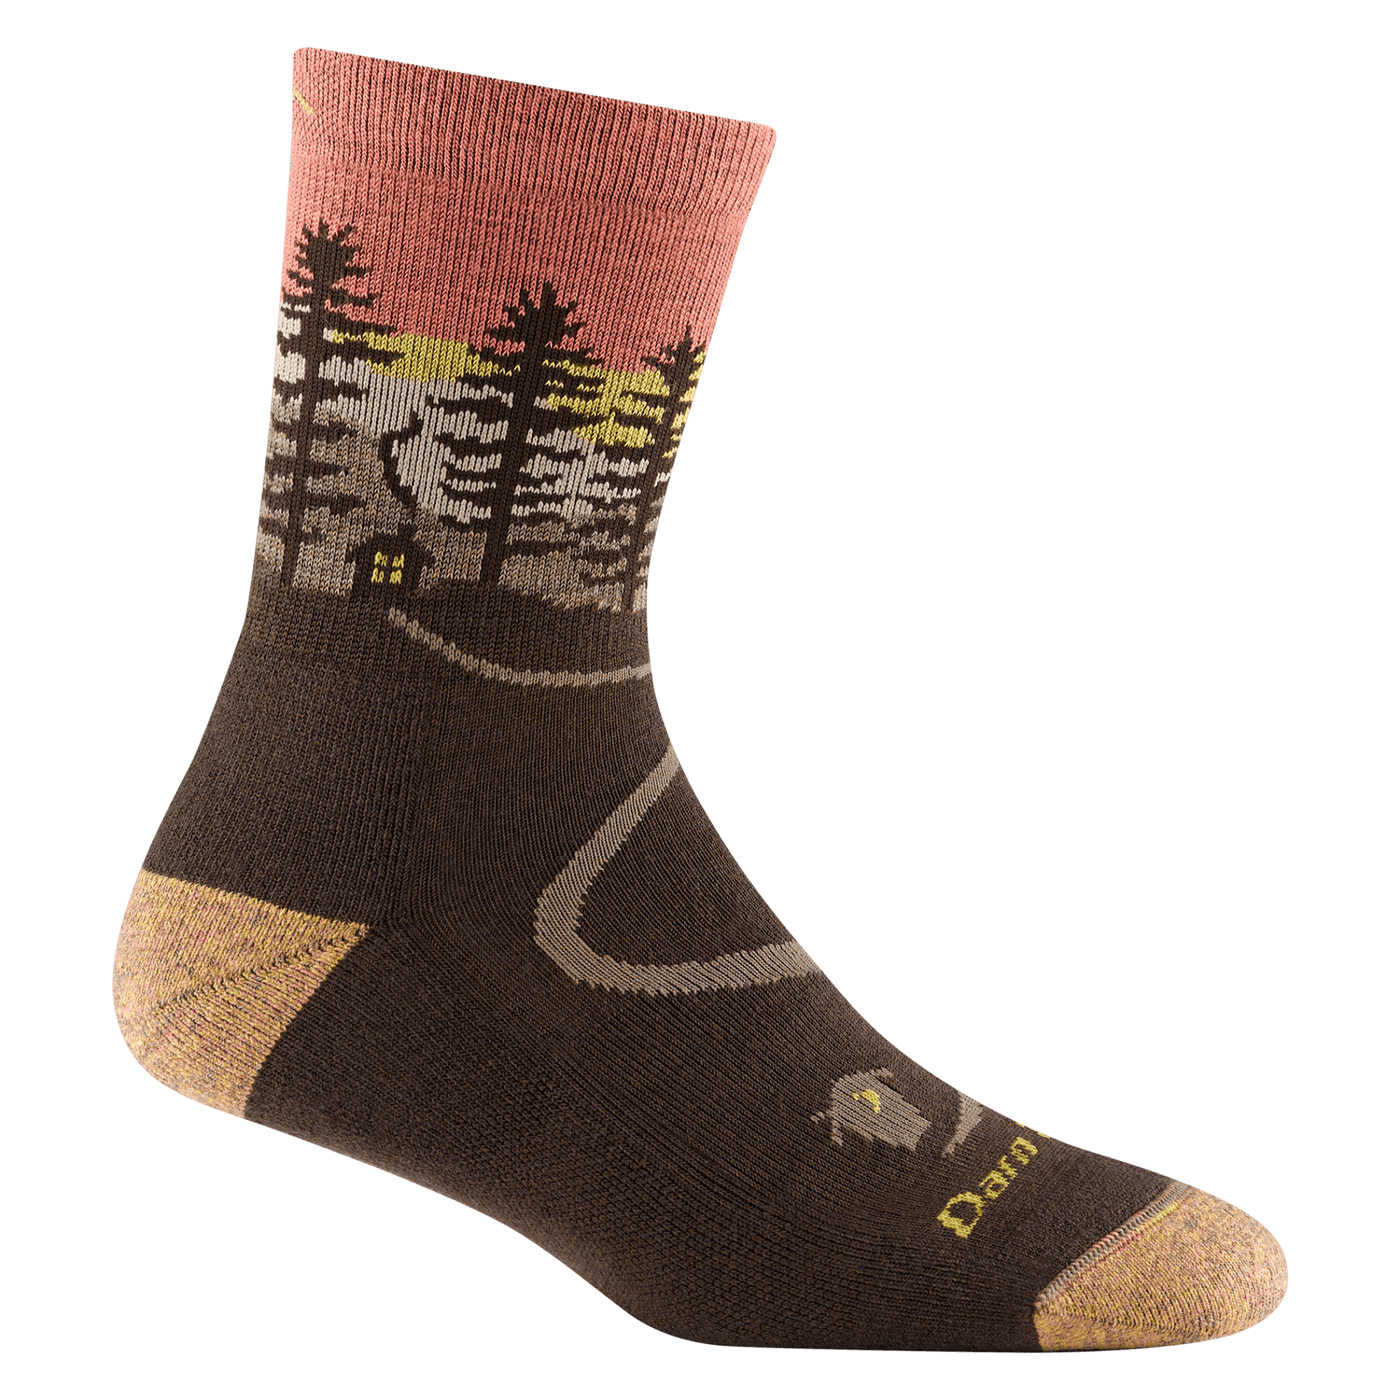 Northwoods, Women's Midweight Micro Crew with Cushion #5013 - Darn Tough - The Sock Monster